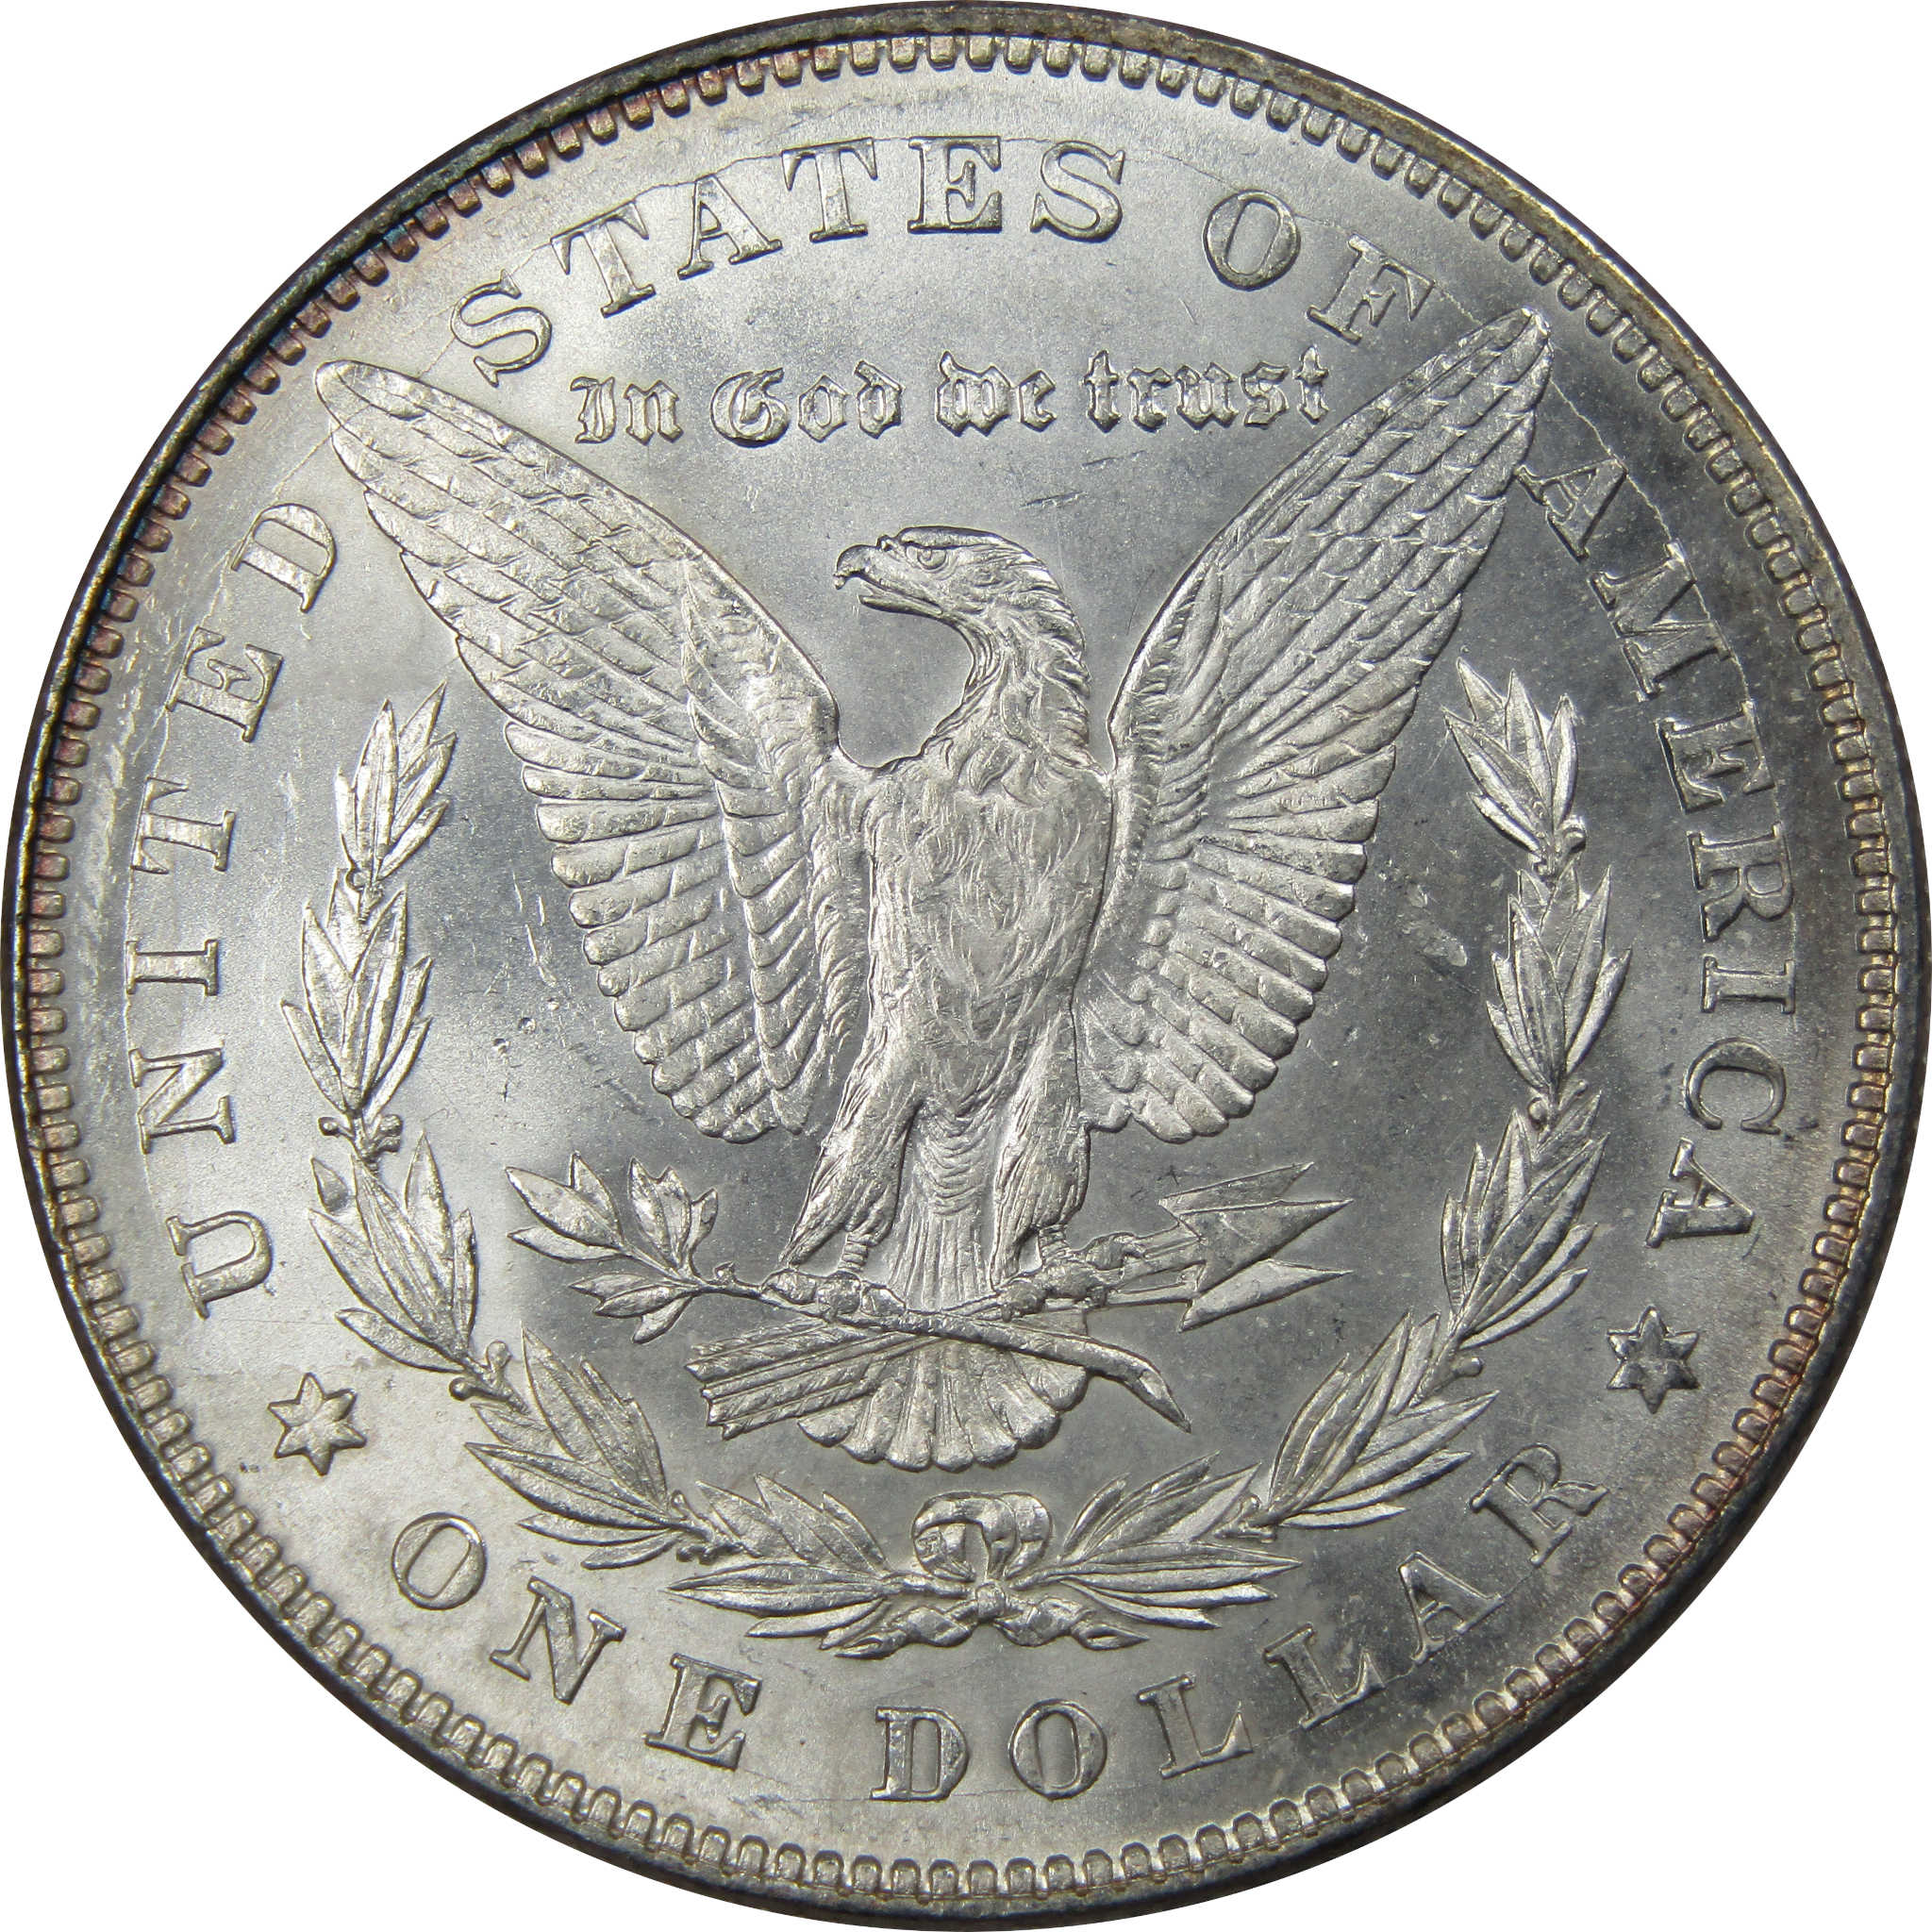 1878 7TF Rev 78 Morgan Dollar Choice About Uncirculated SKU:I1088 - Morgan coin - Morgan silver dollar - Morgan silver dollar for sale - Profile Coins &amp; Collectibles